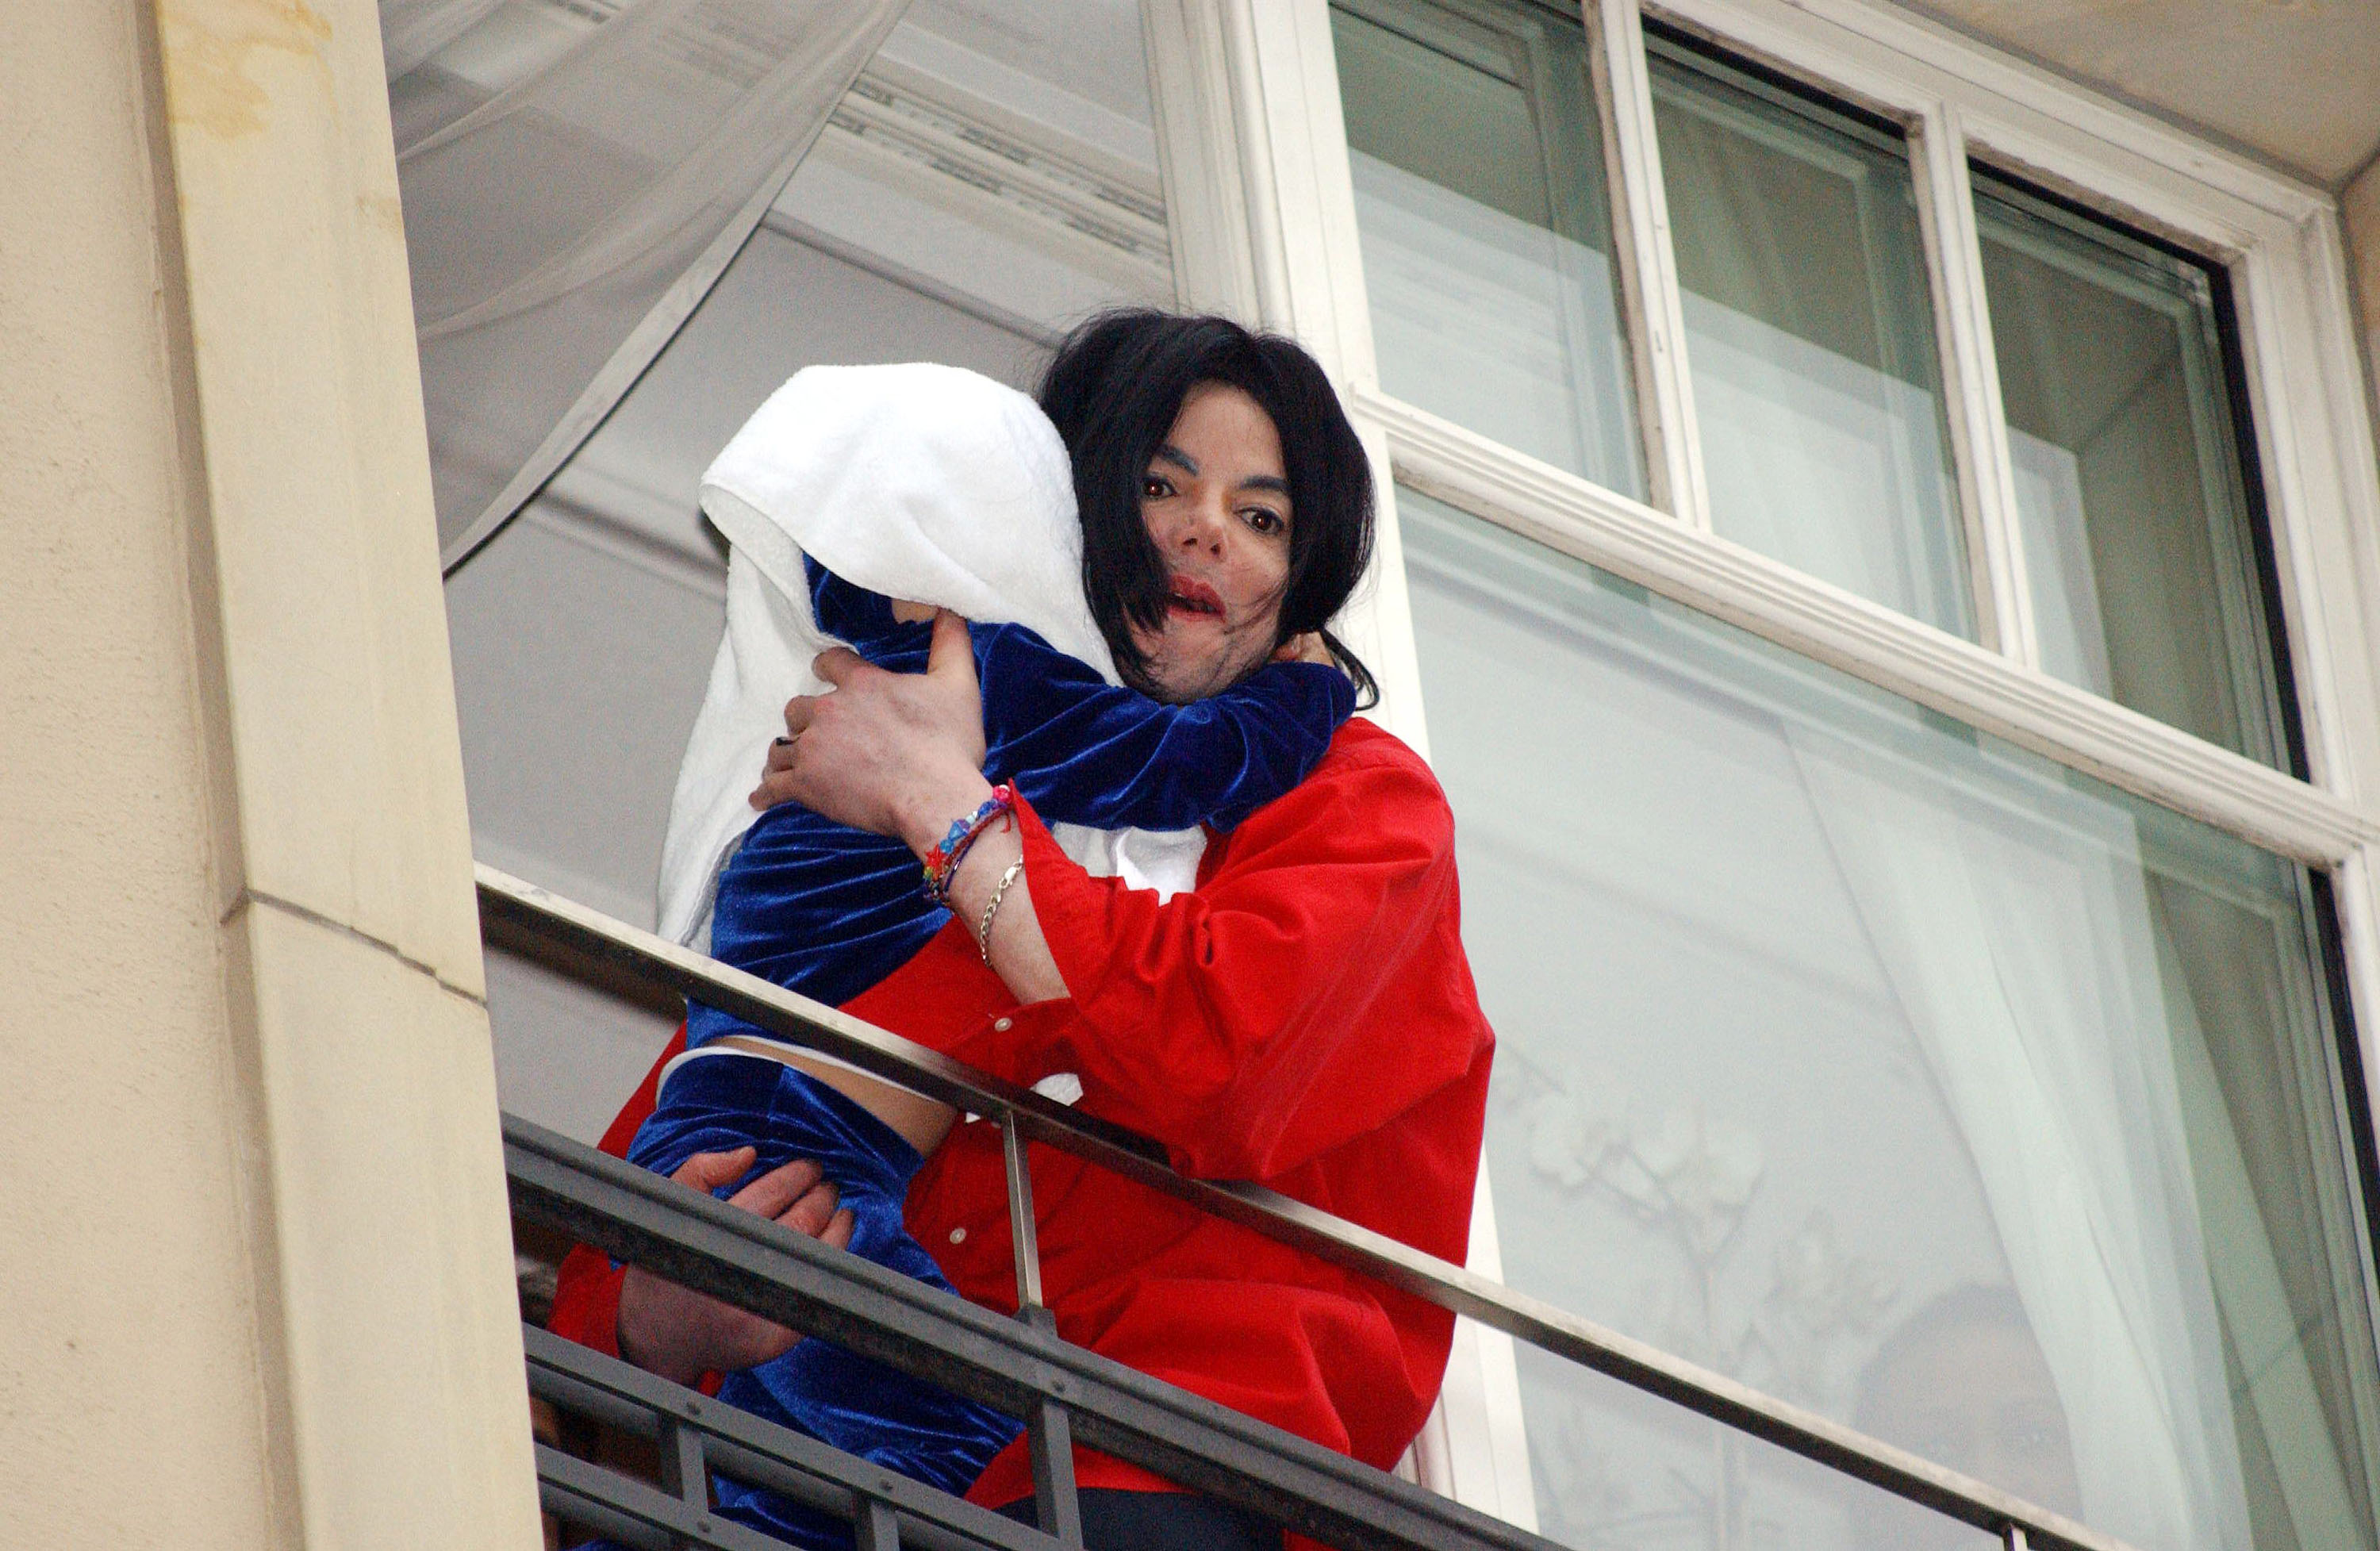 Michael Jackson holding one of his kids while on a balcony in Berlin, Germany on November 19, 2002 | Source: Getty Images